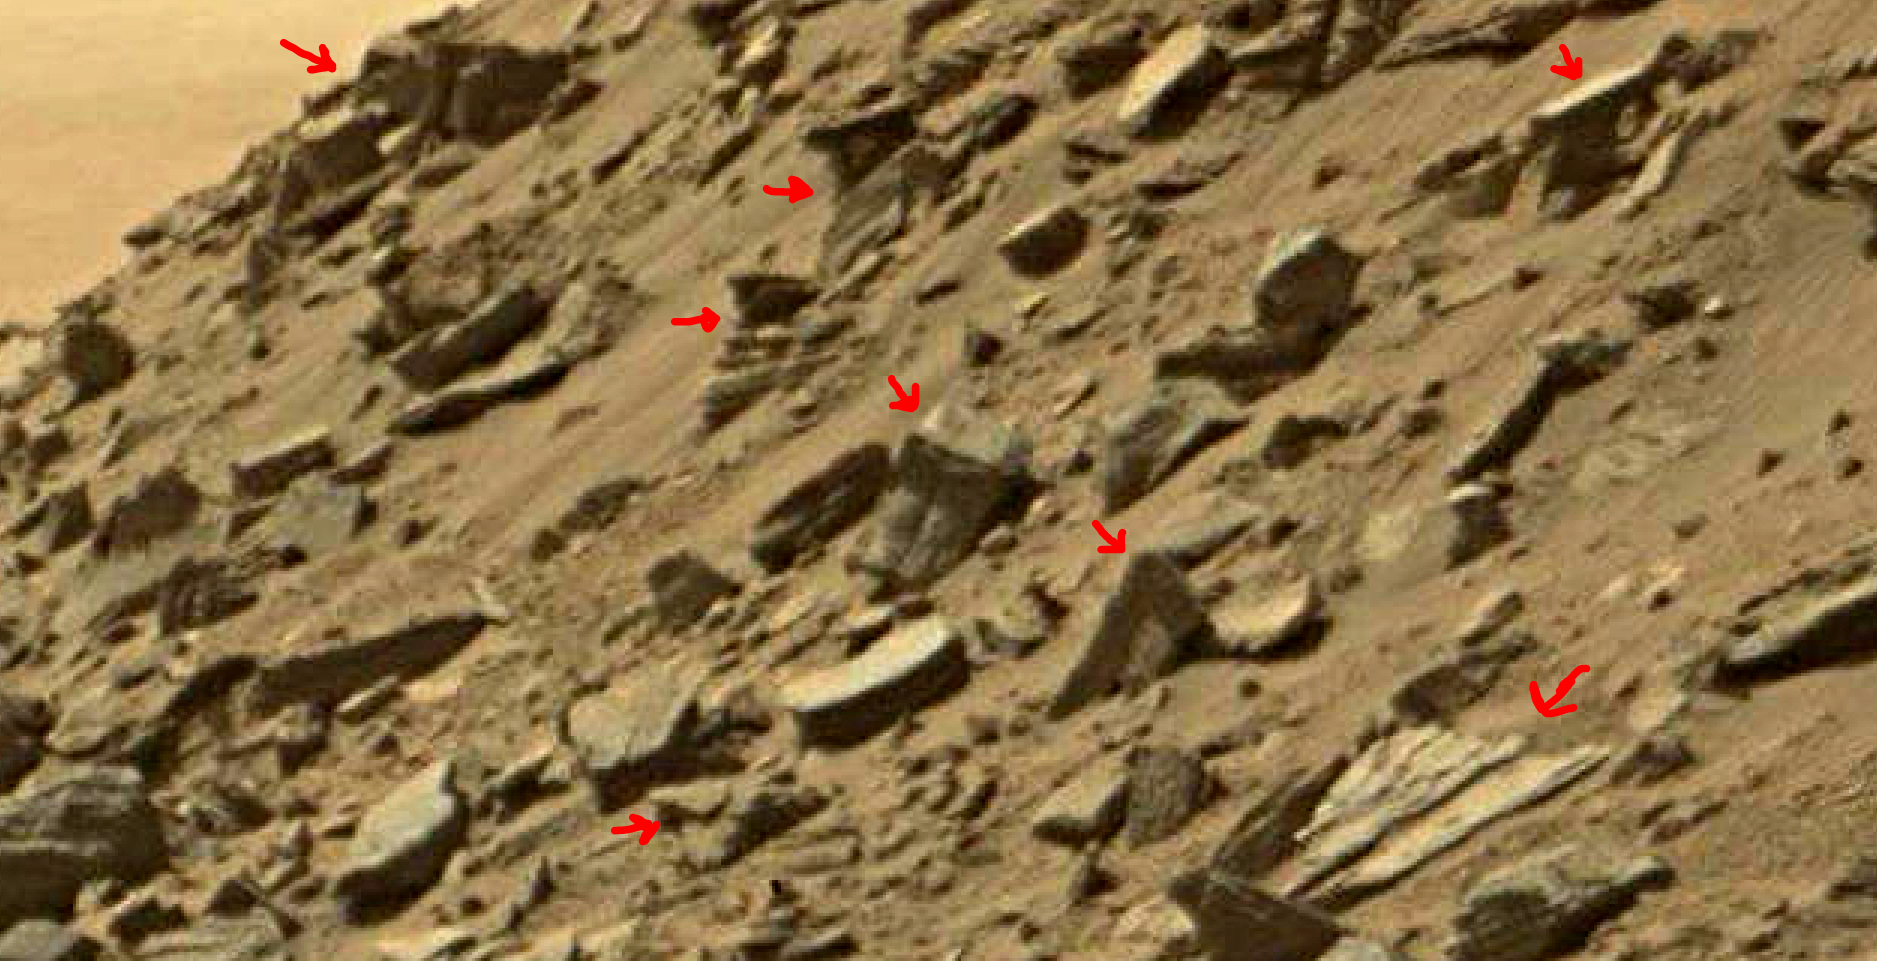 mars sol 1429 anomaly artifacts 4 was life on mars